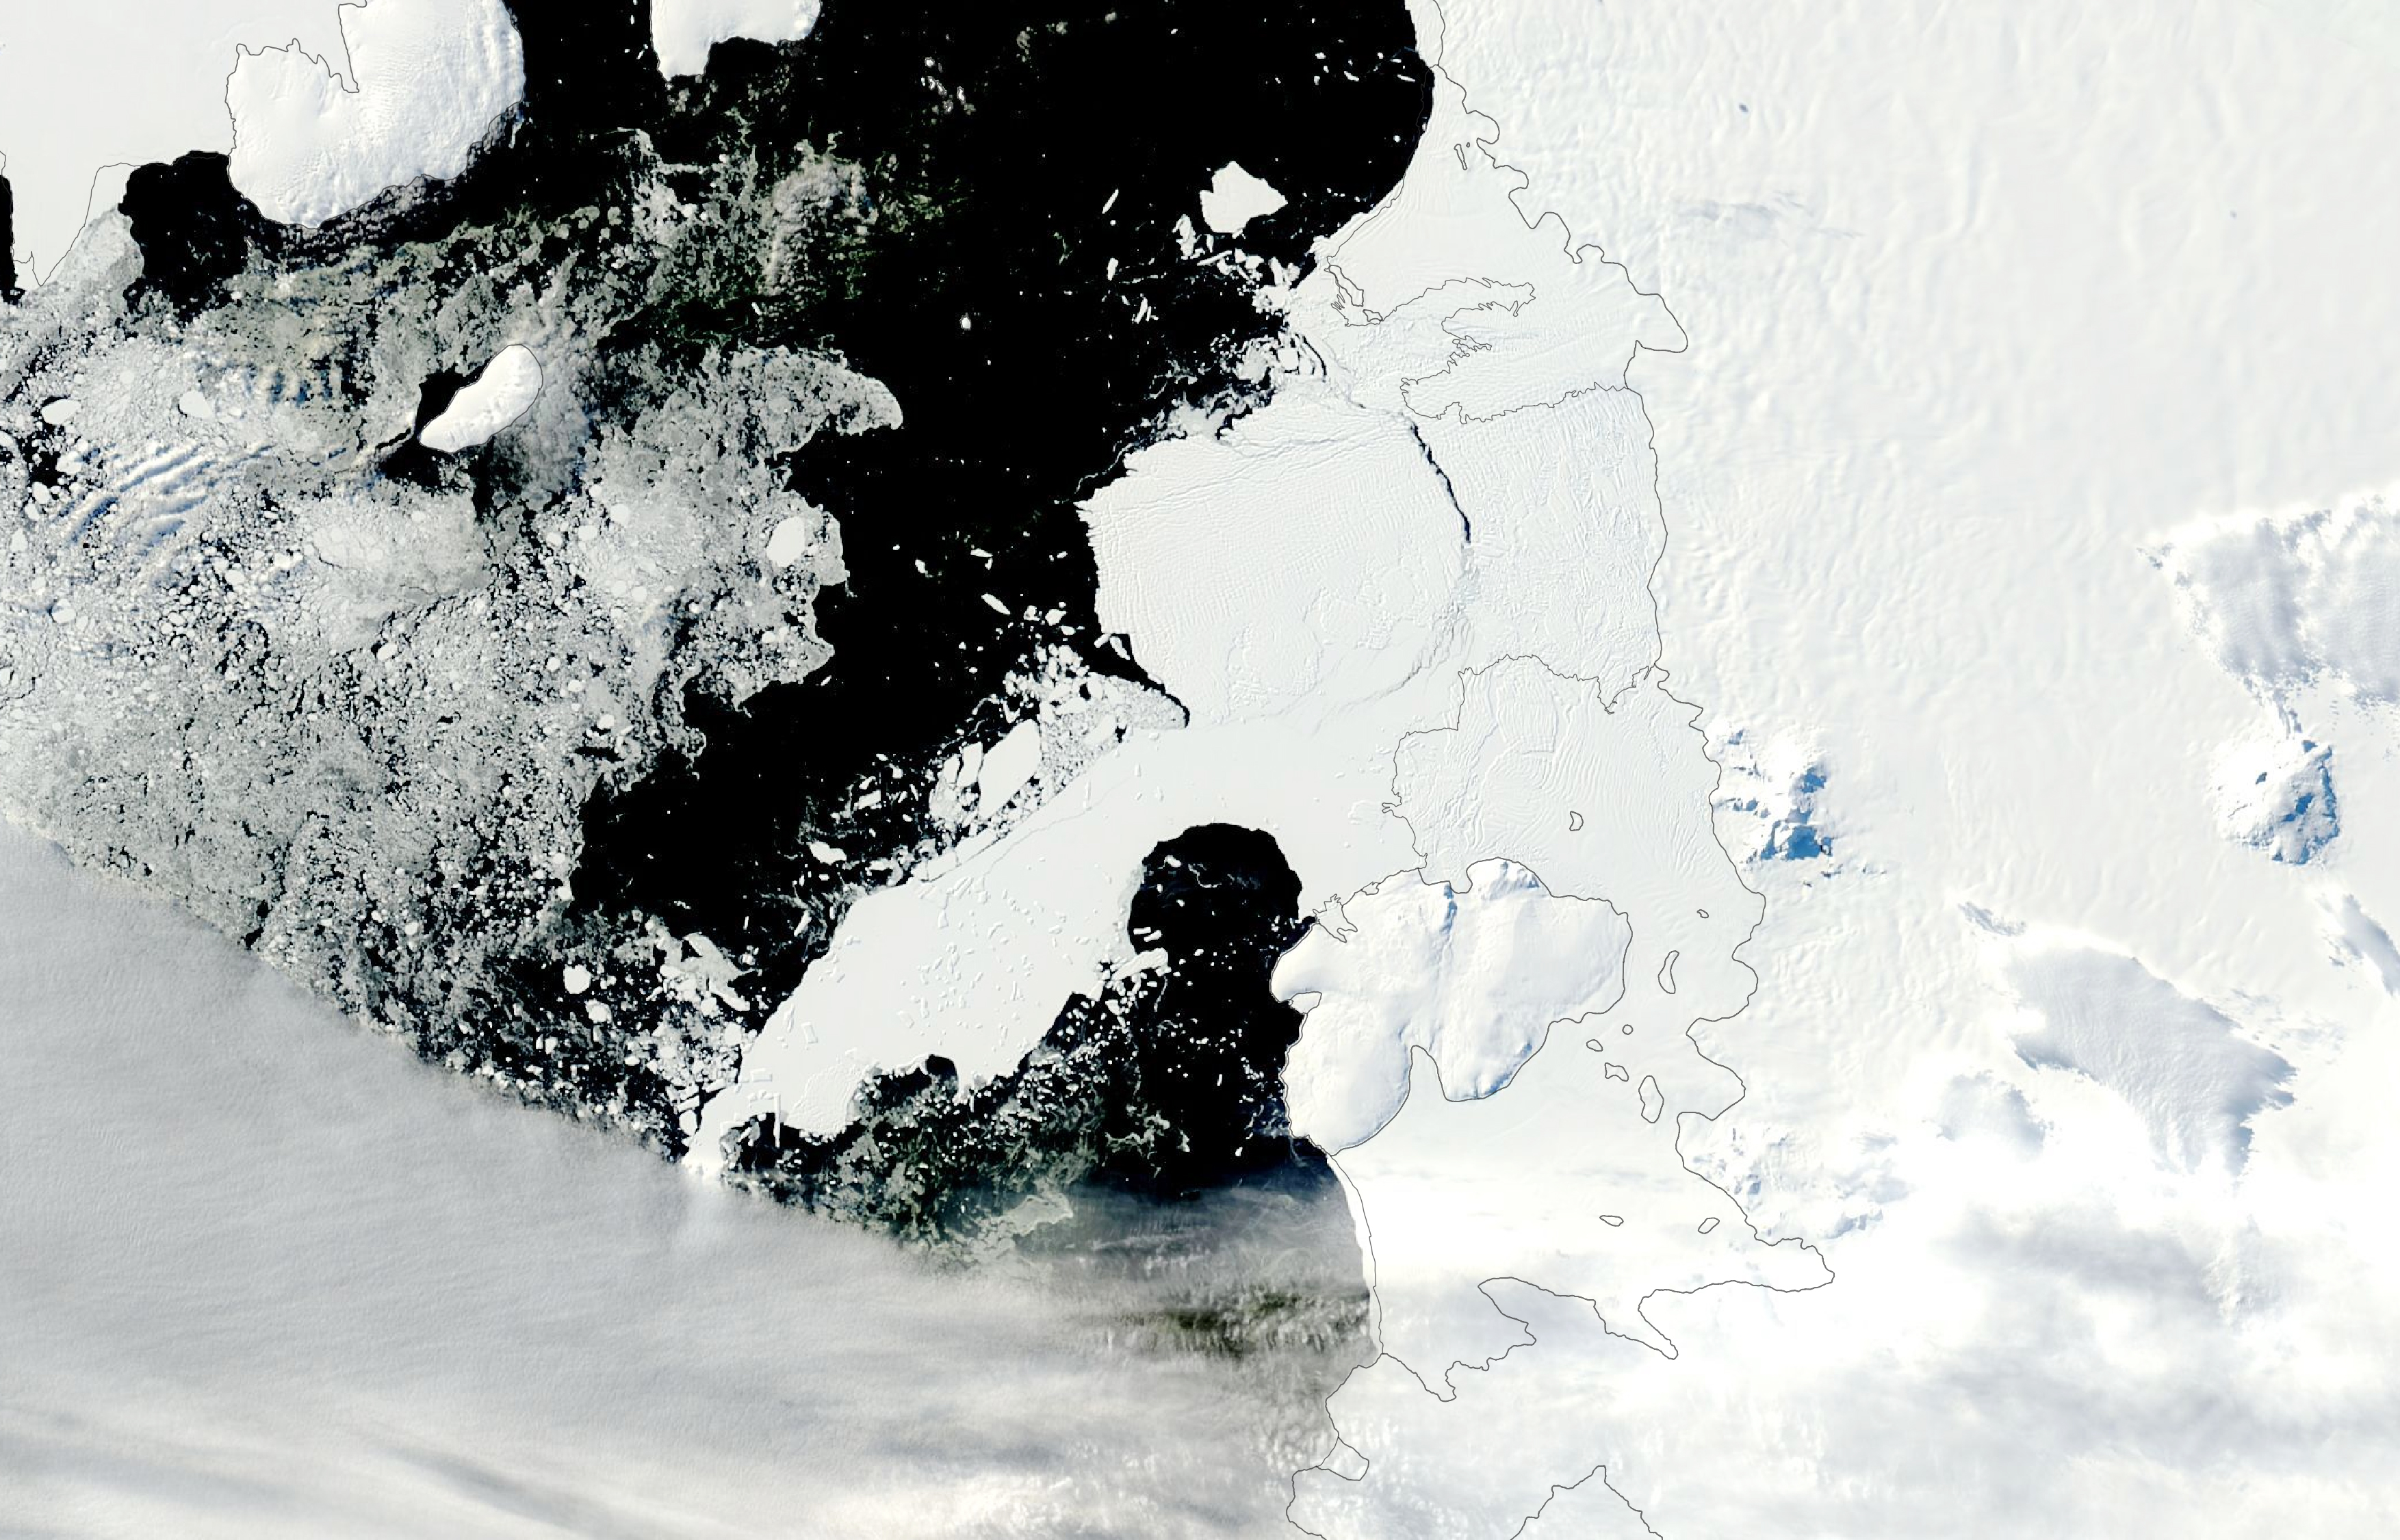 Antarctic Berg Grounded for Decades - related image preview